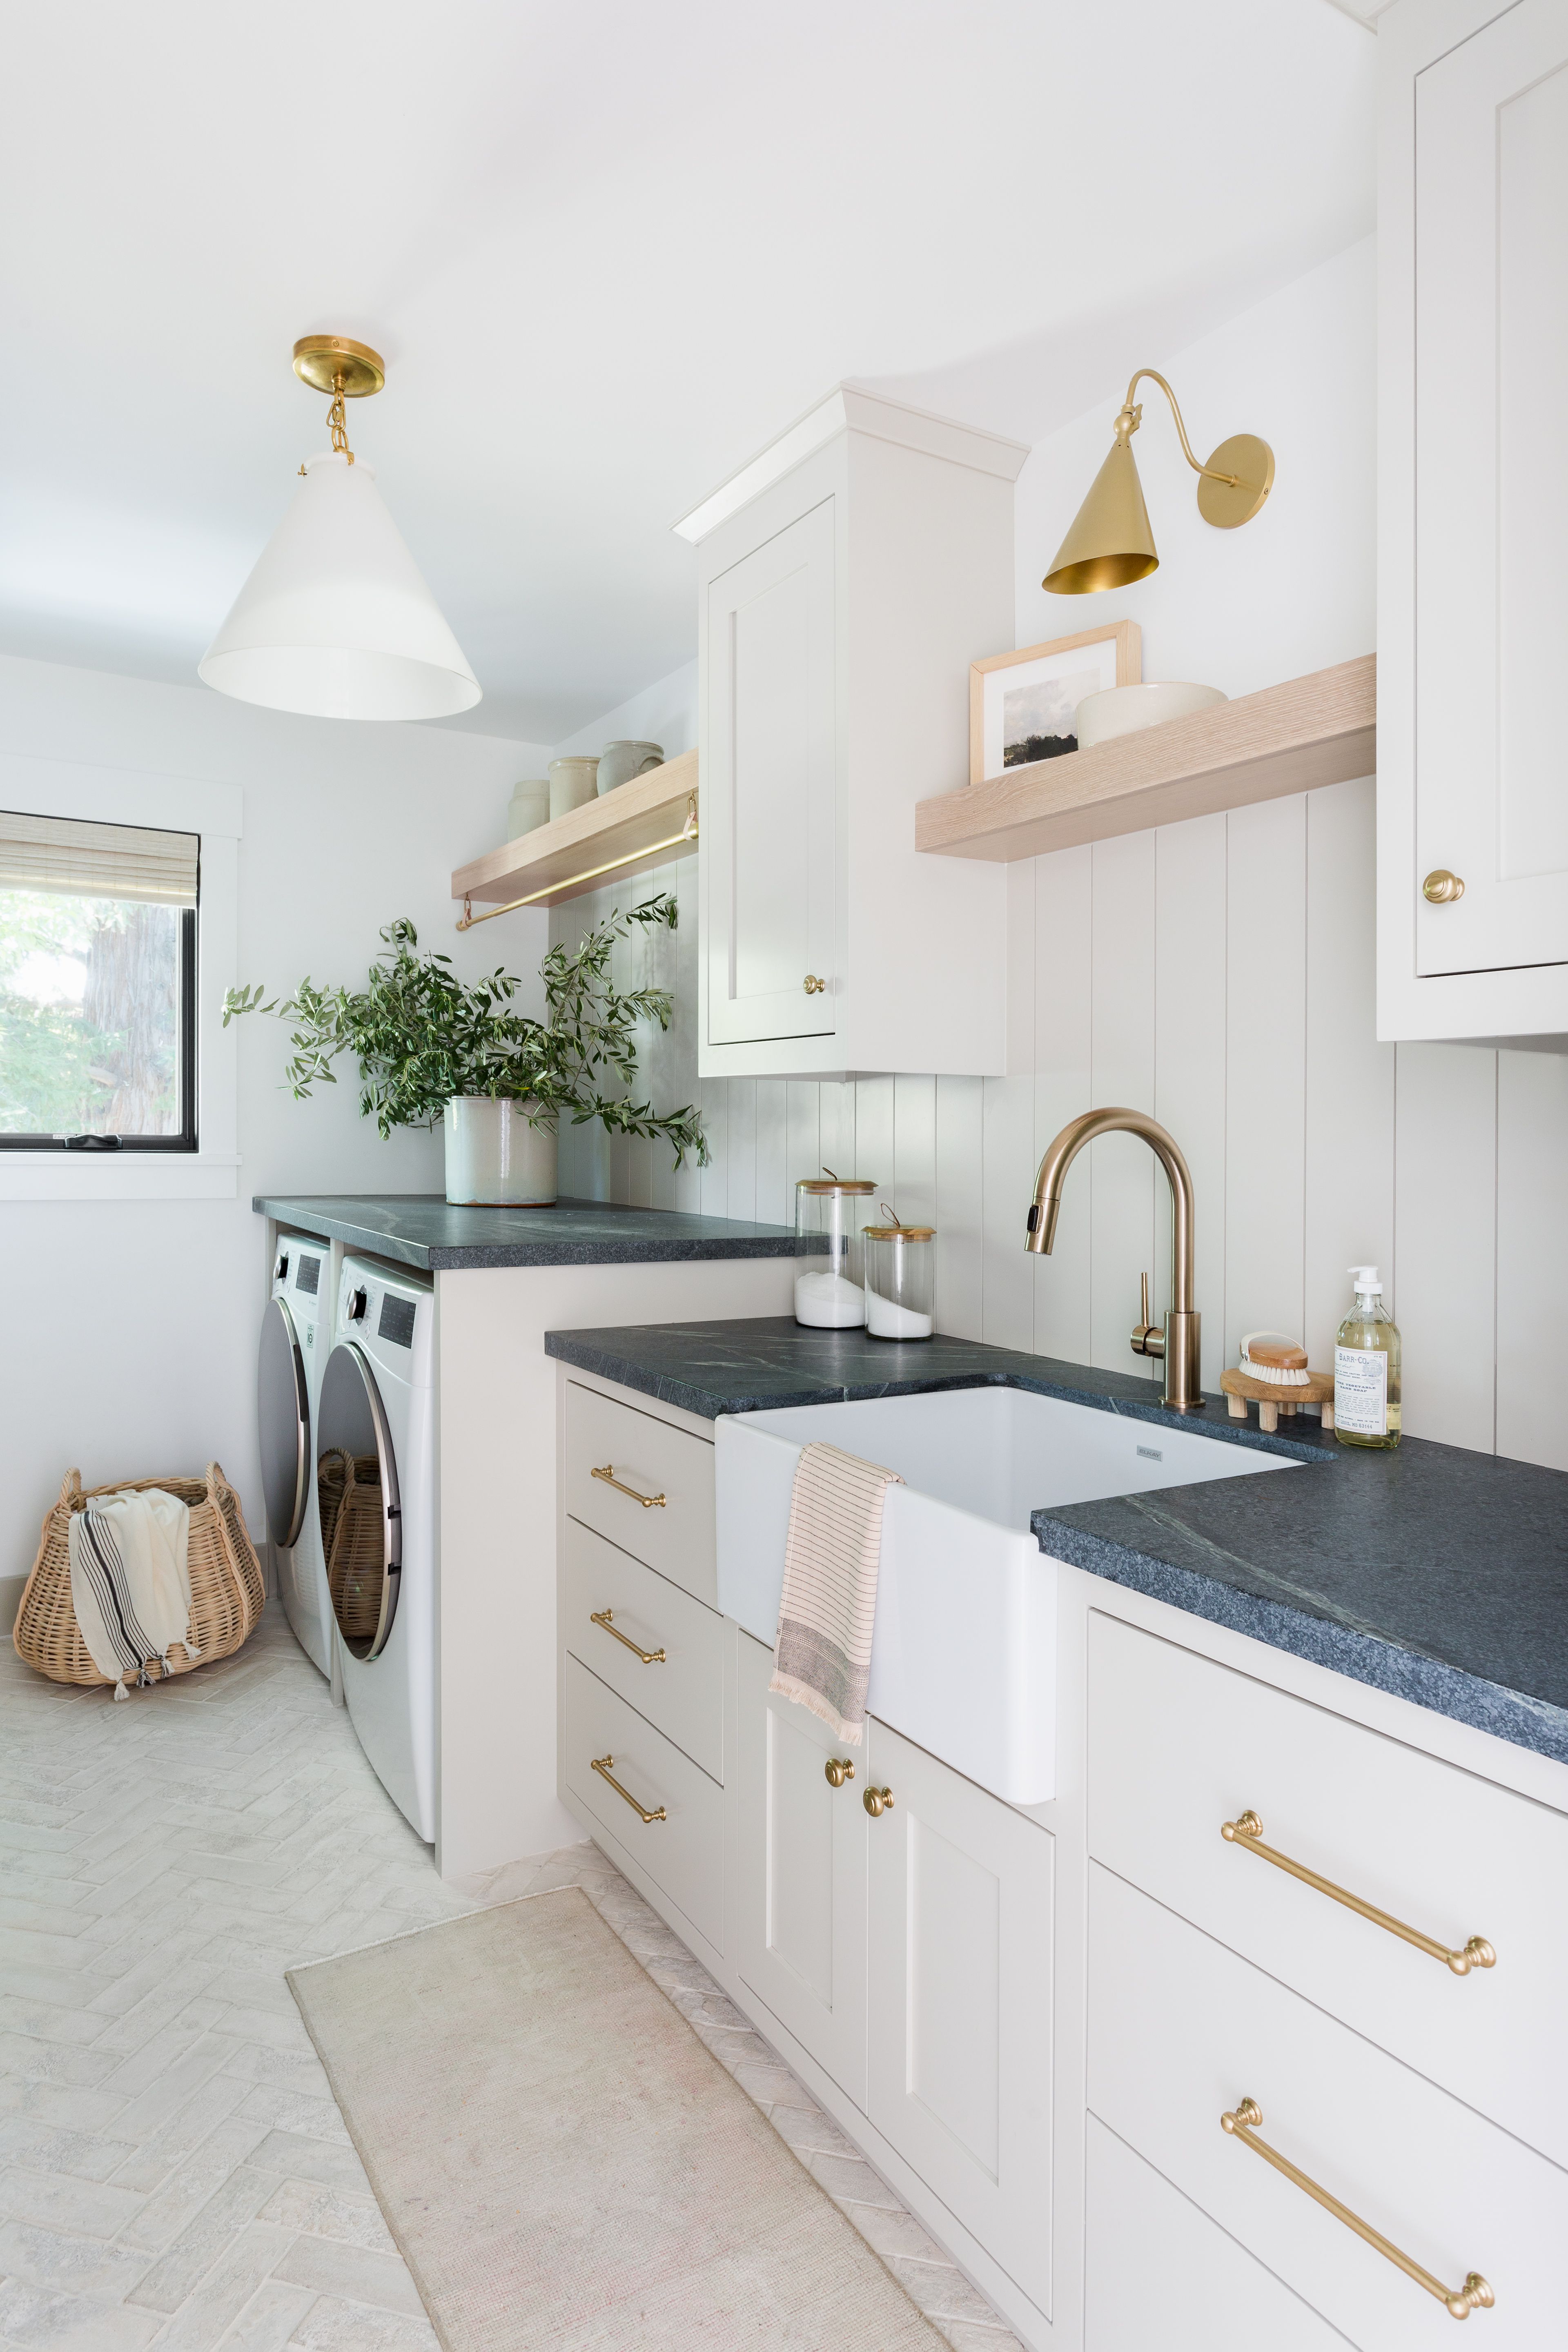 The Best Kitchen Countertops for Your Home, According to Design Pros